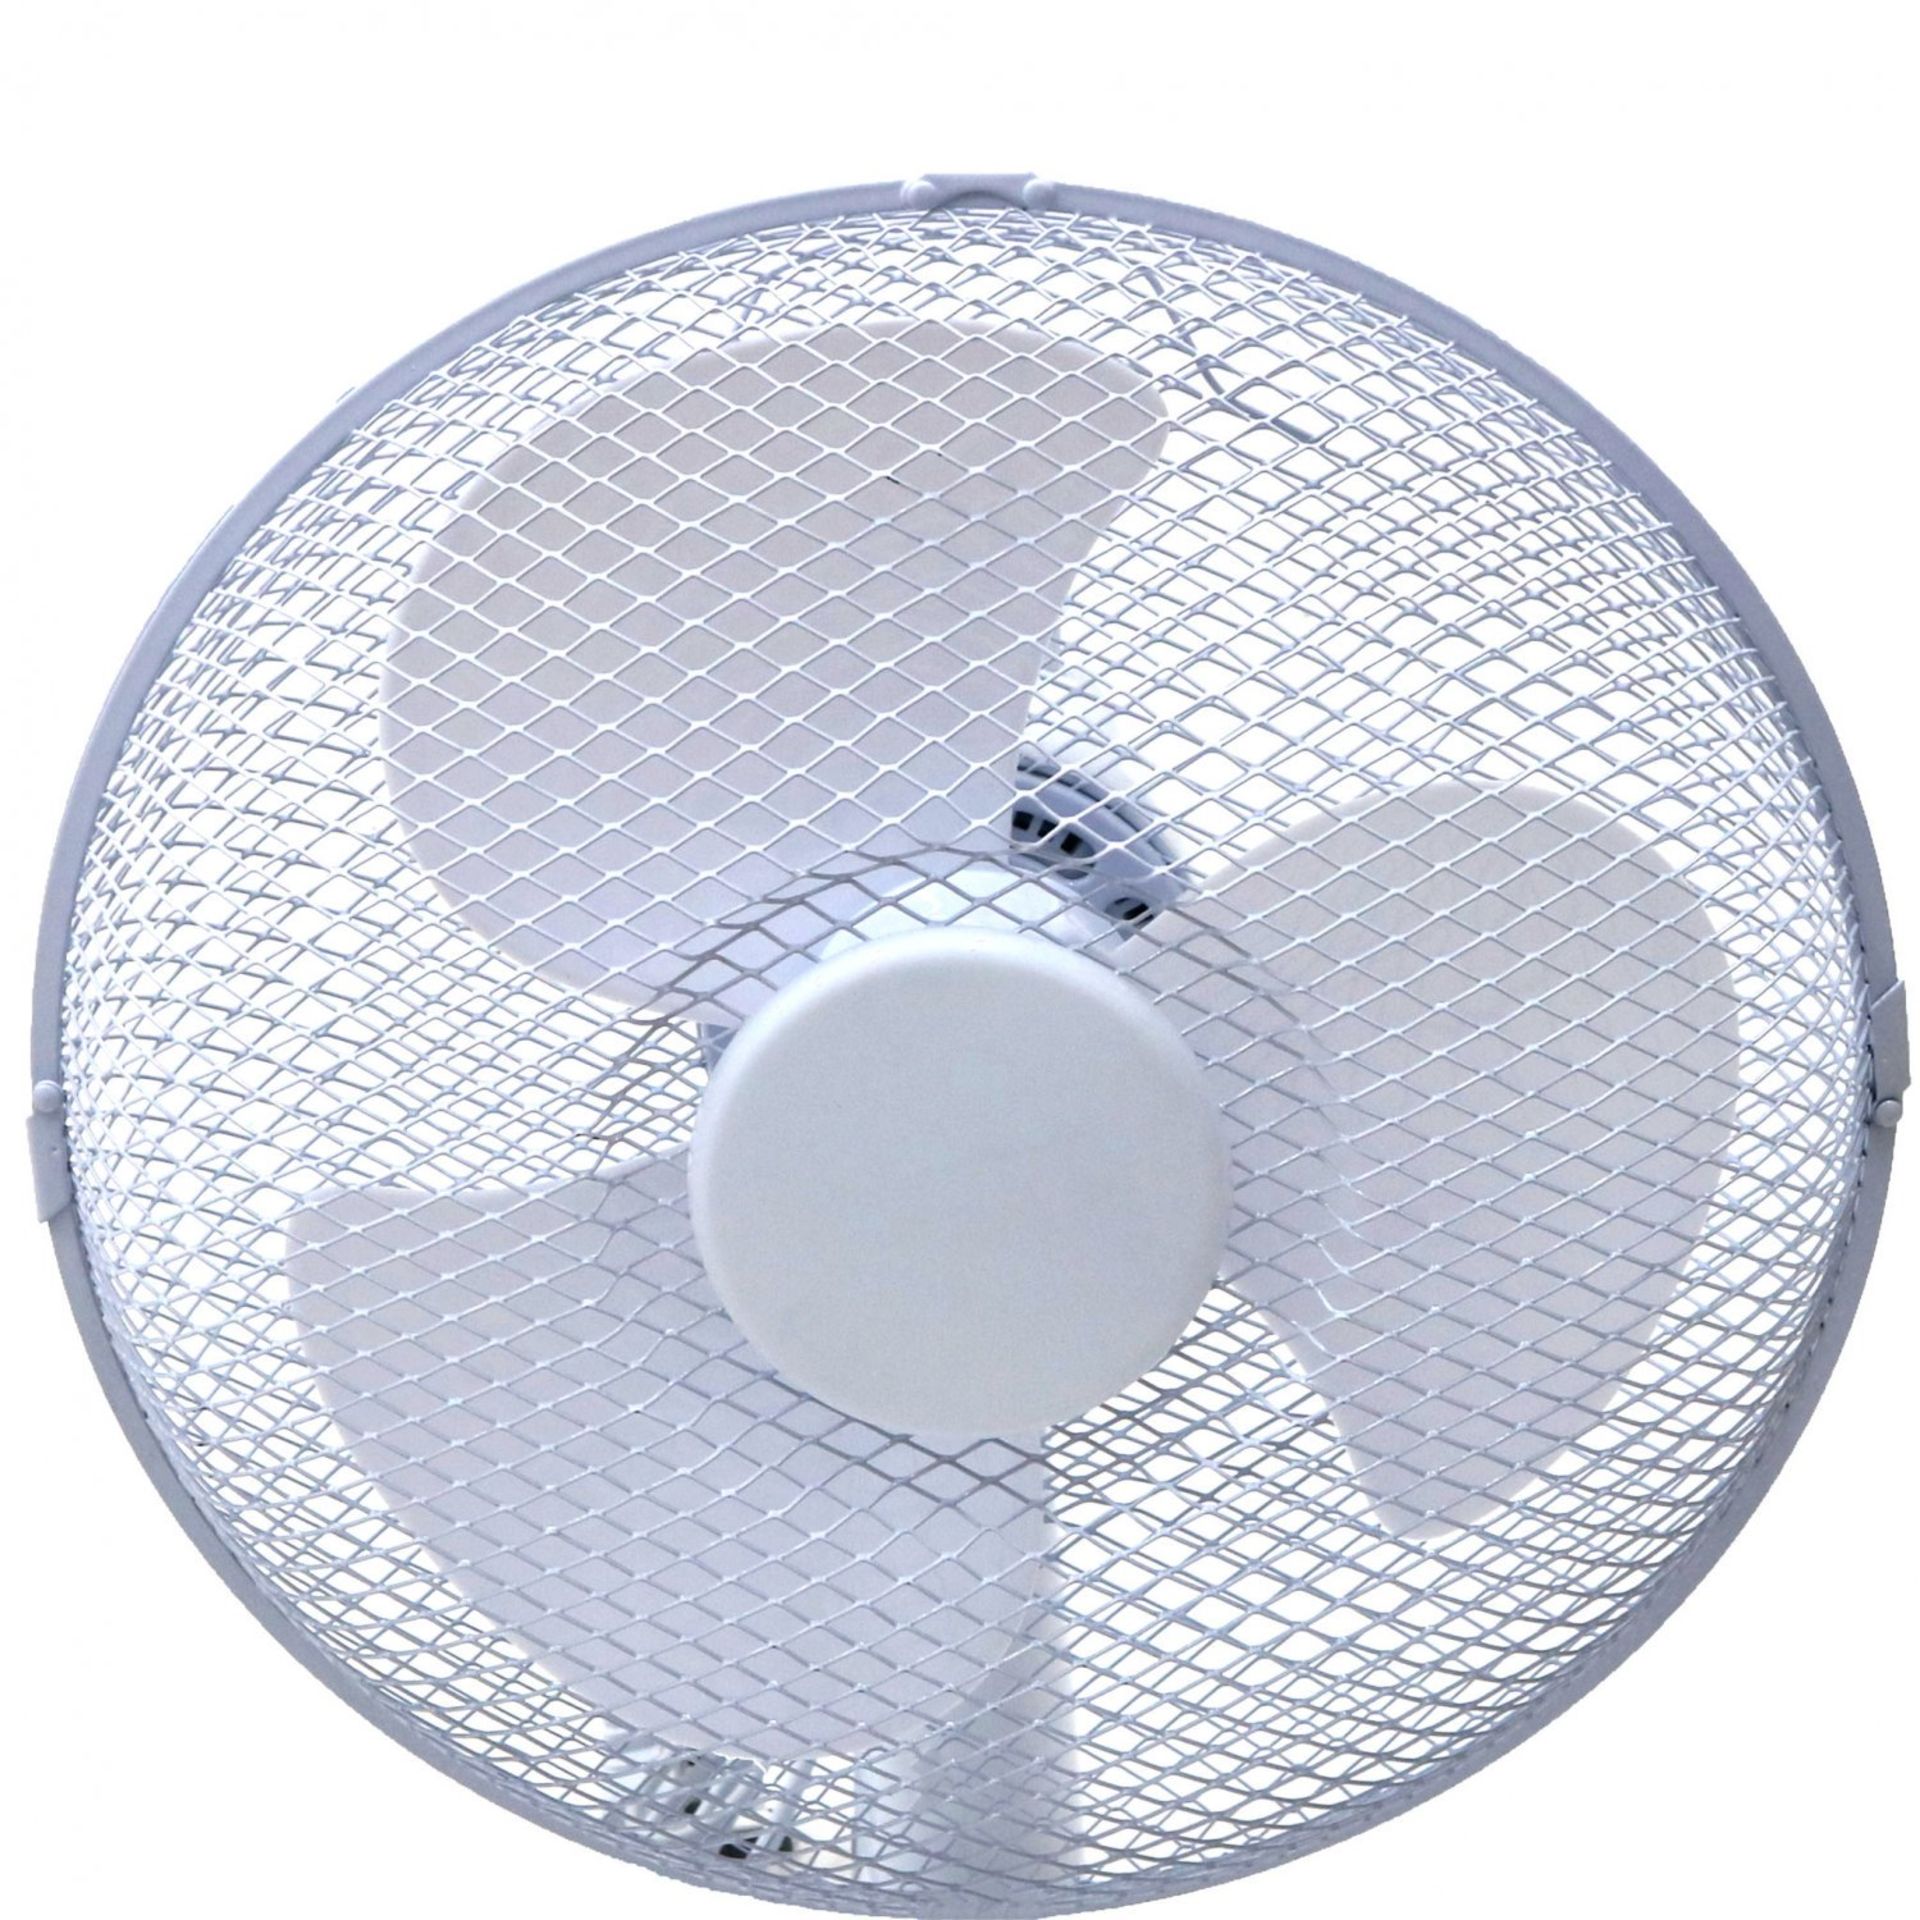 (KK60) 12" Oscillating White Desk Top Fan Stay cool this year with the 12" desk top f... - Image 2 of 2